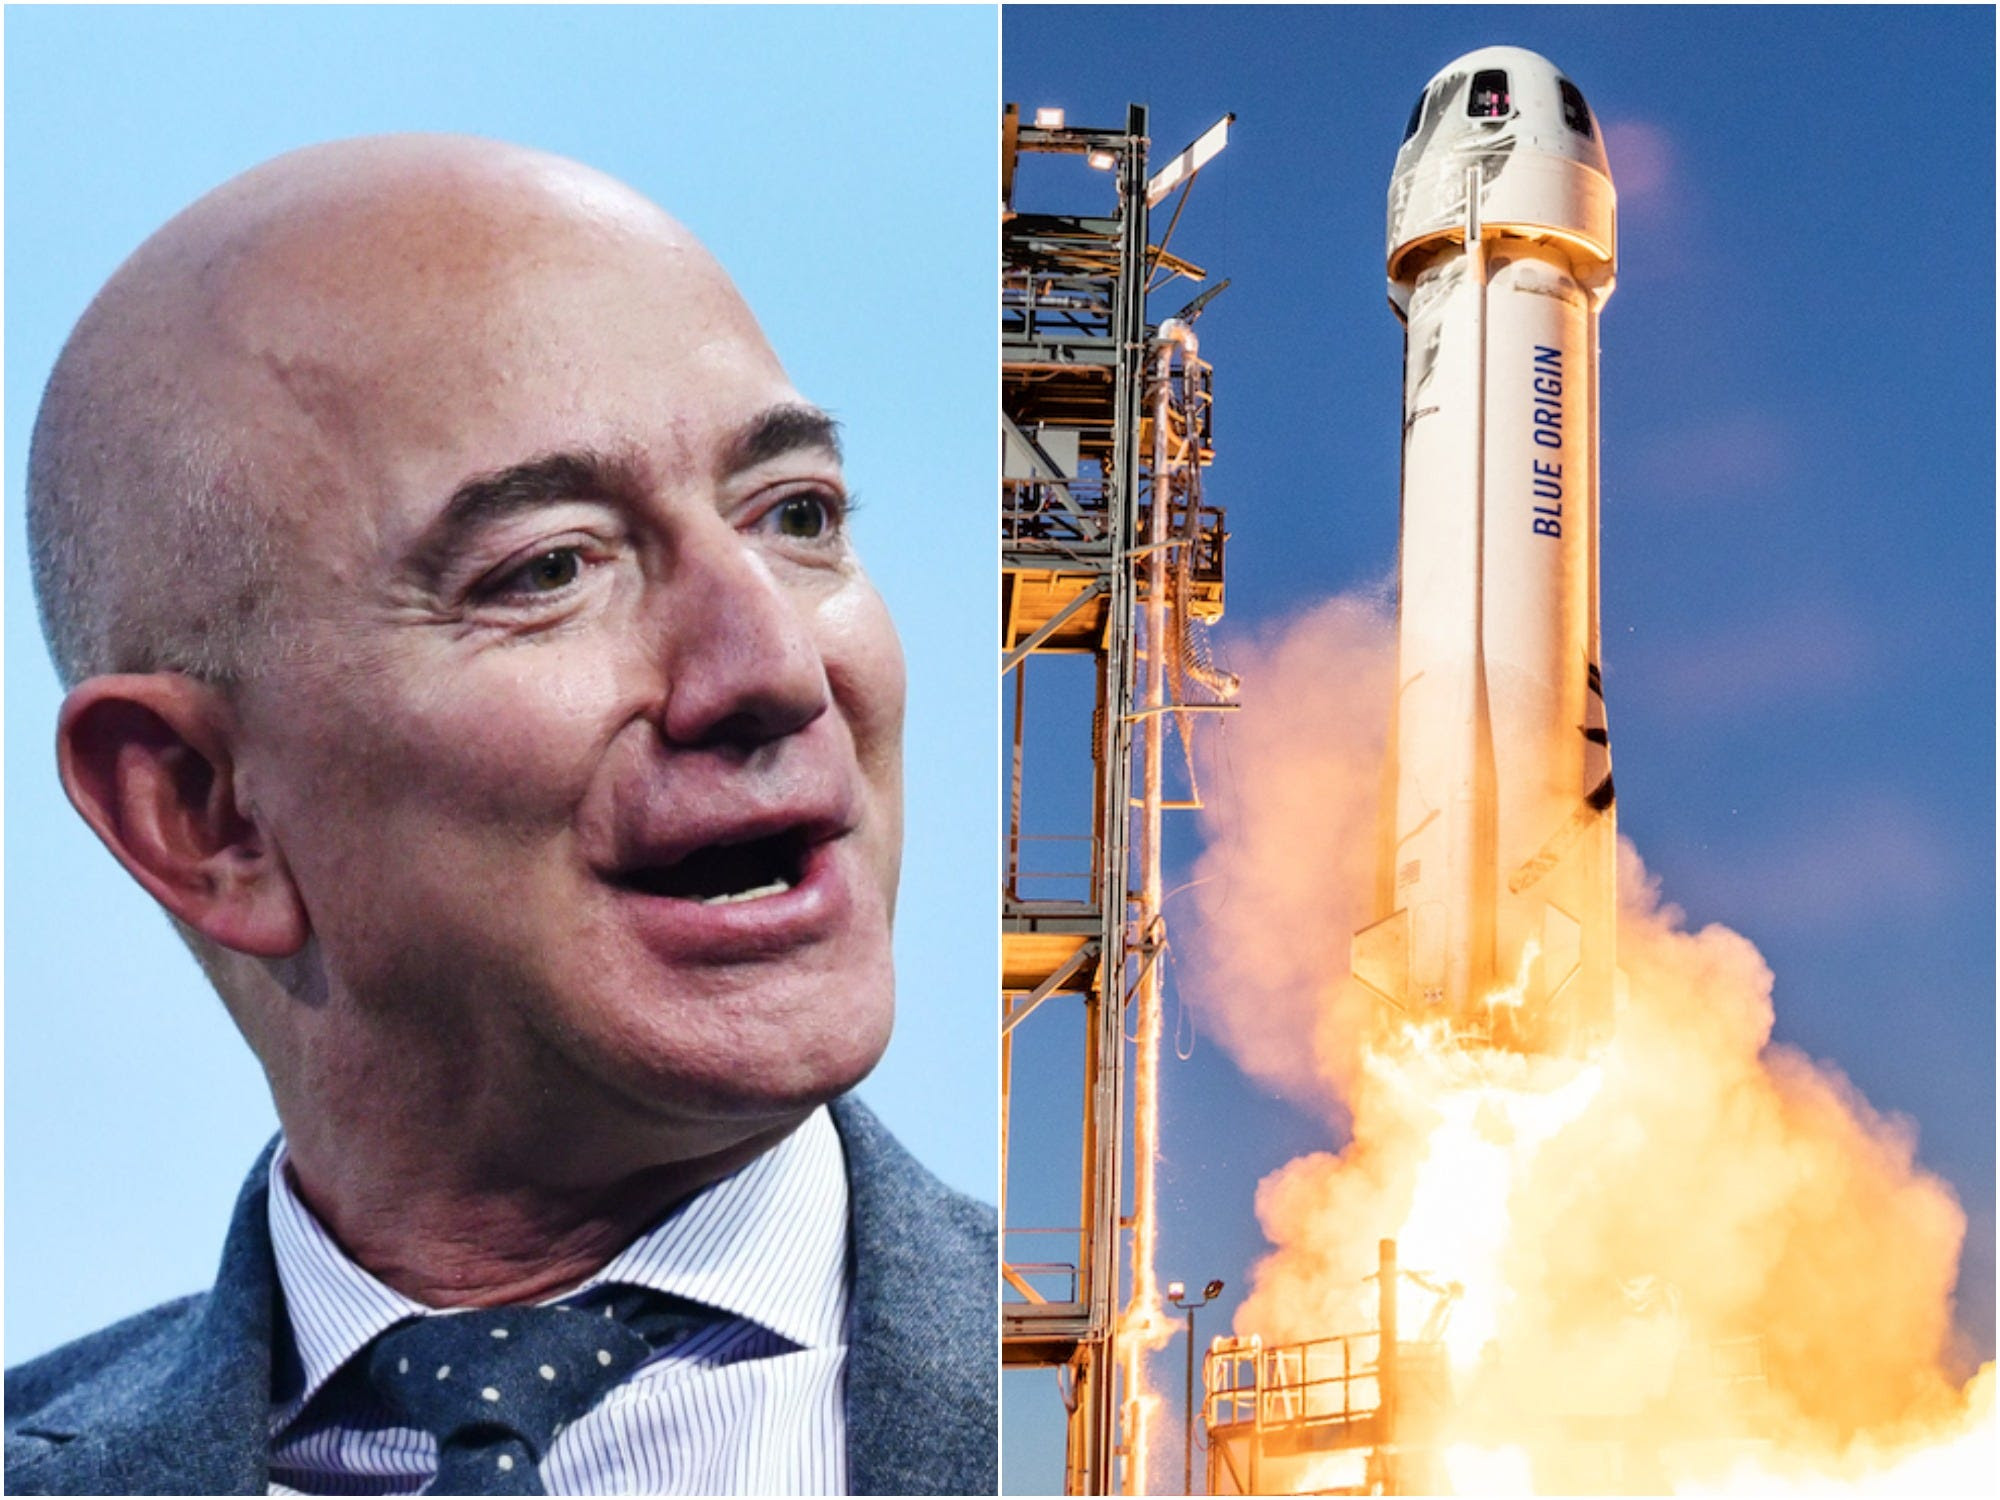 Jeff Bezos on left and a Blue Origin rocket on right